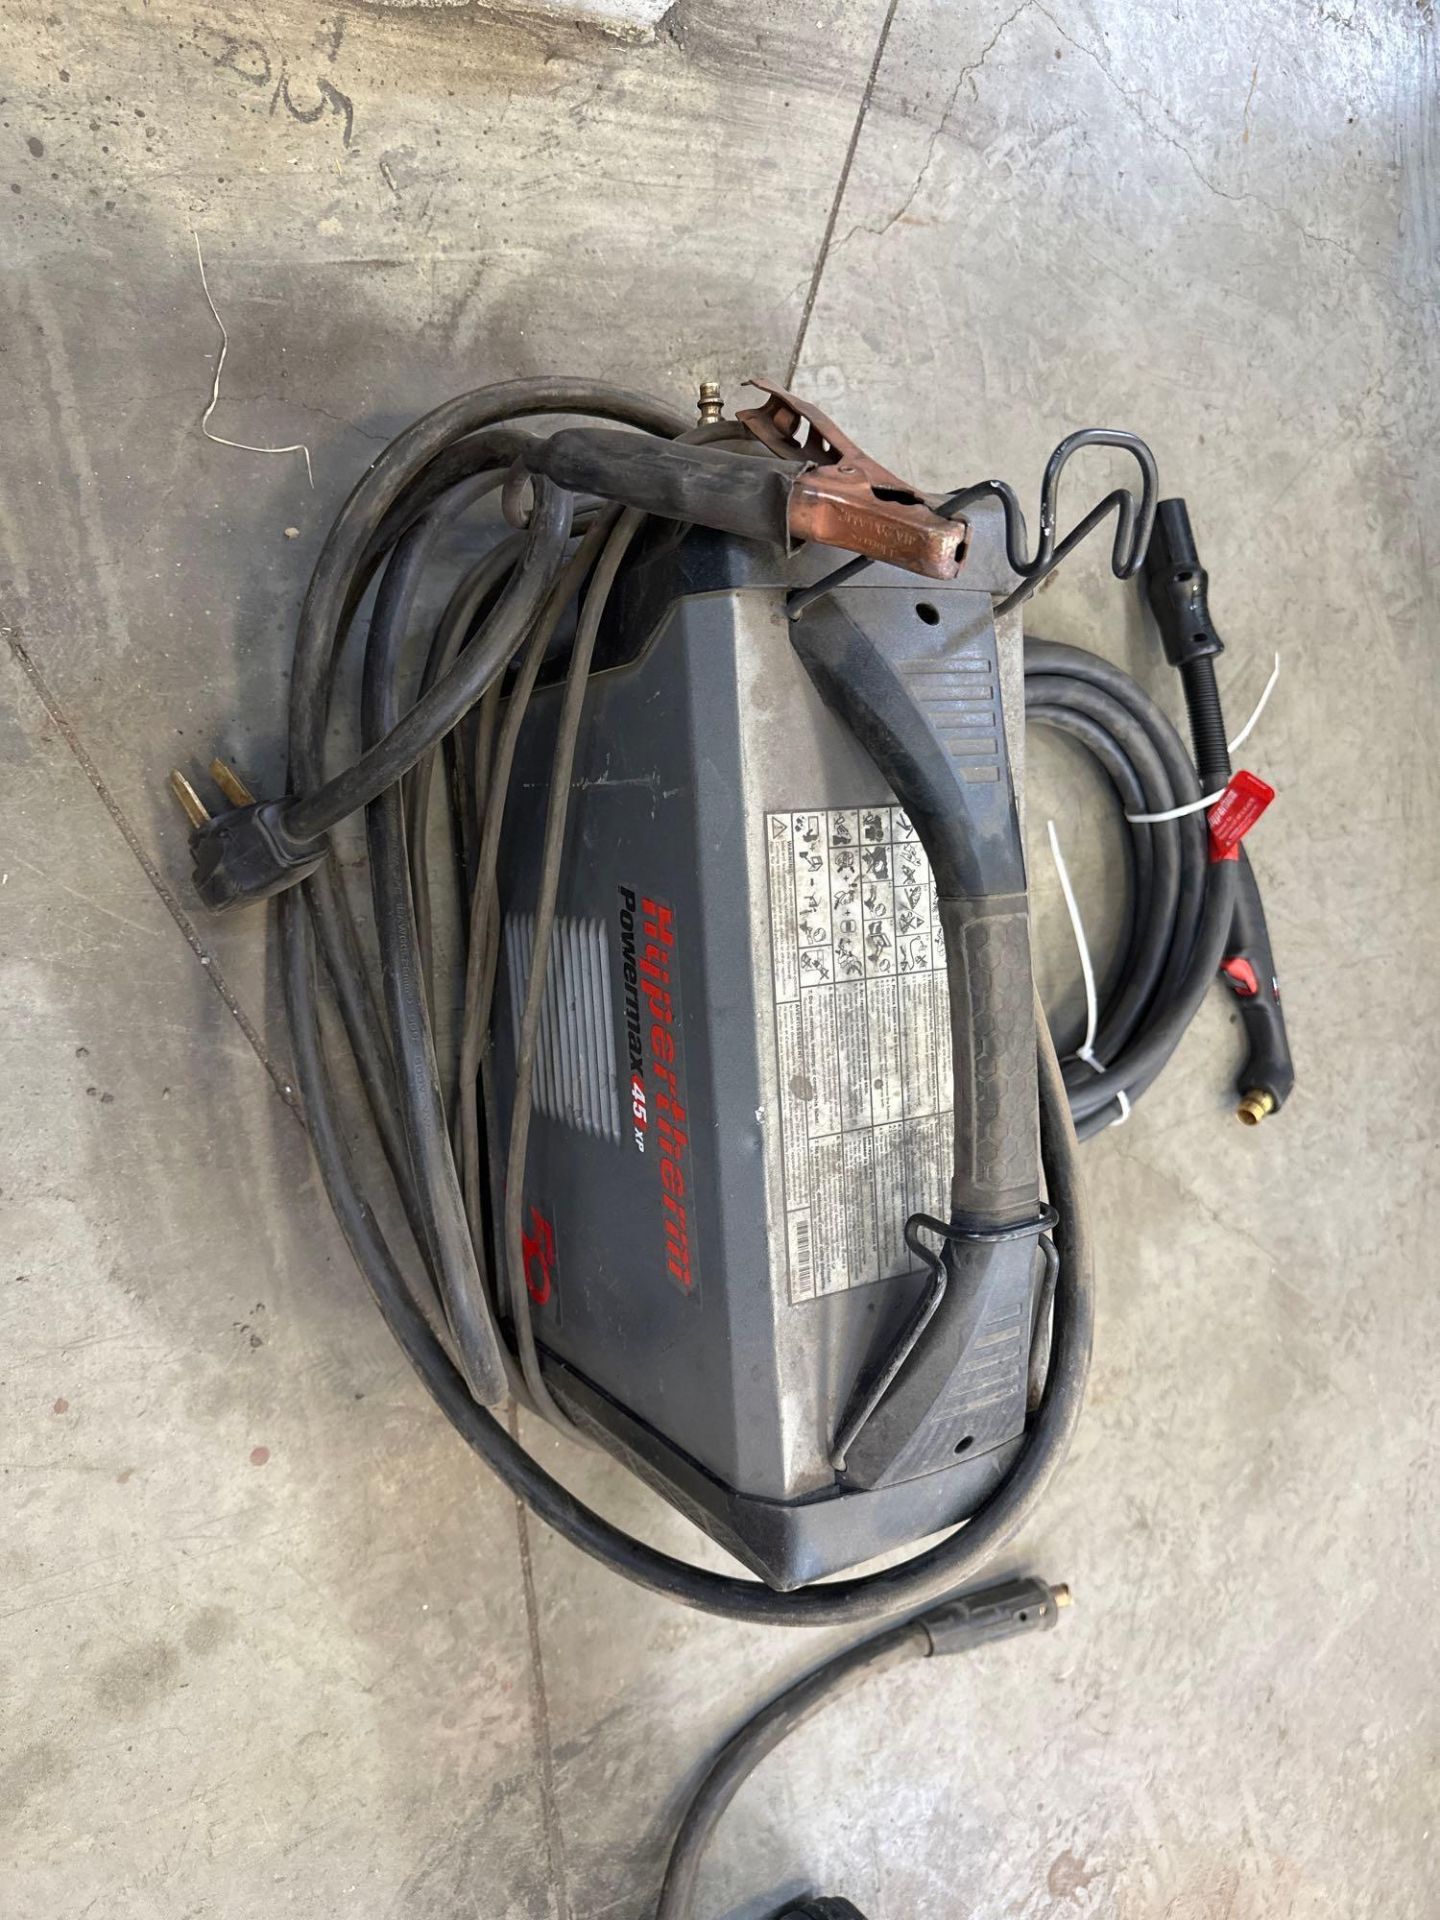 Hypertherm Powermax 45 Plasma Cutter w. extra cable - Image 5 of 7